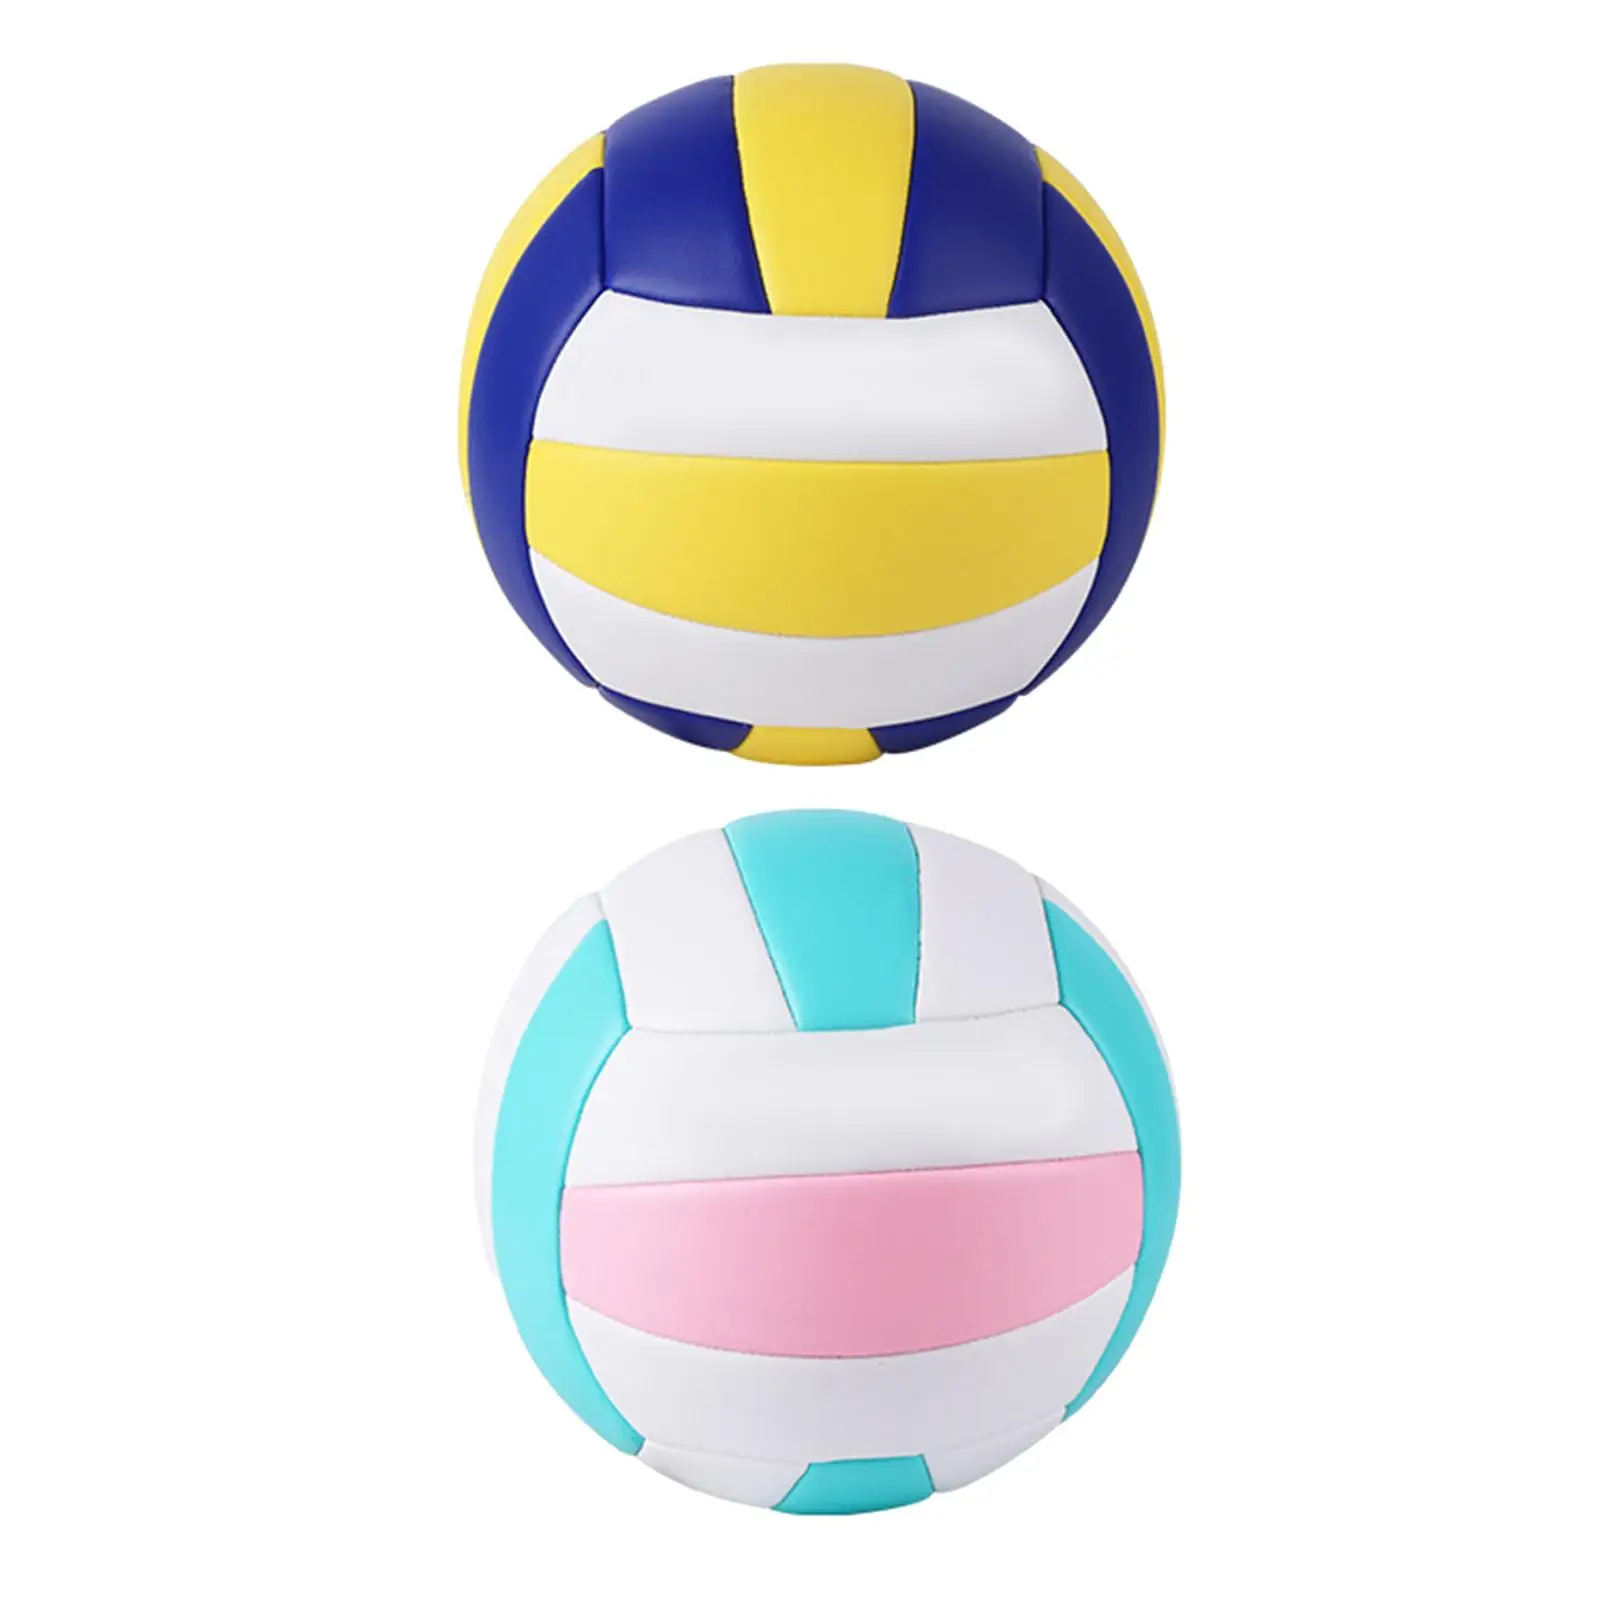 Standard Size 5 Indoor PU Leather Recreational Volleyball Ball with Inflator, 